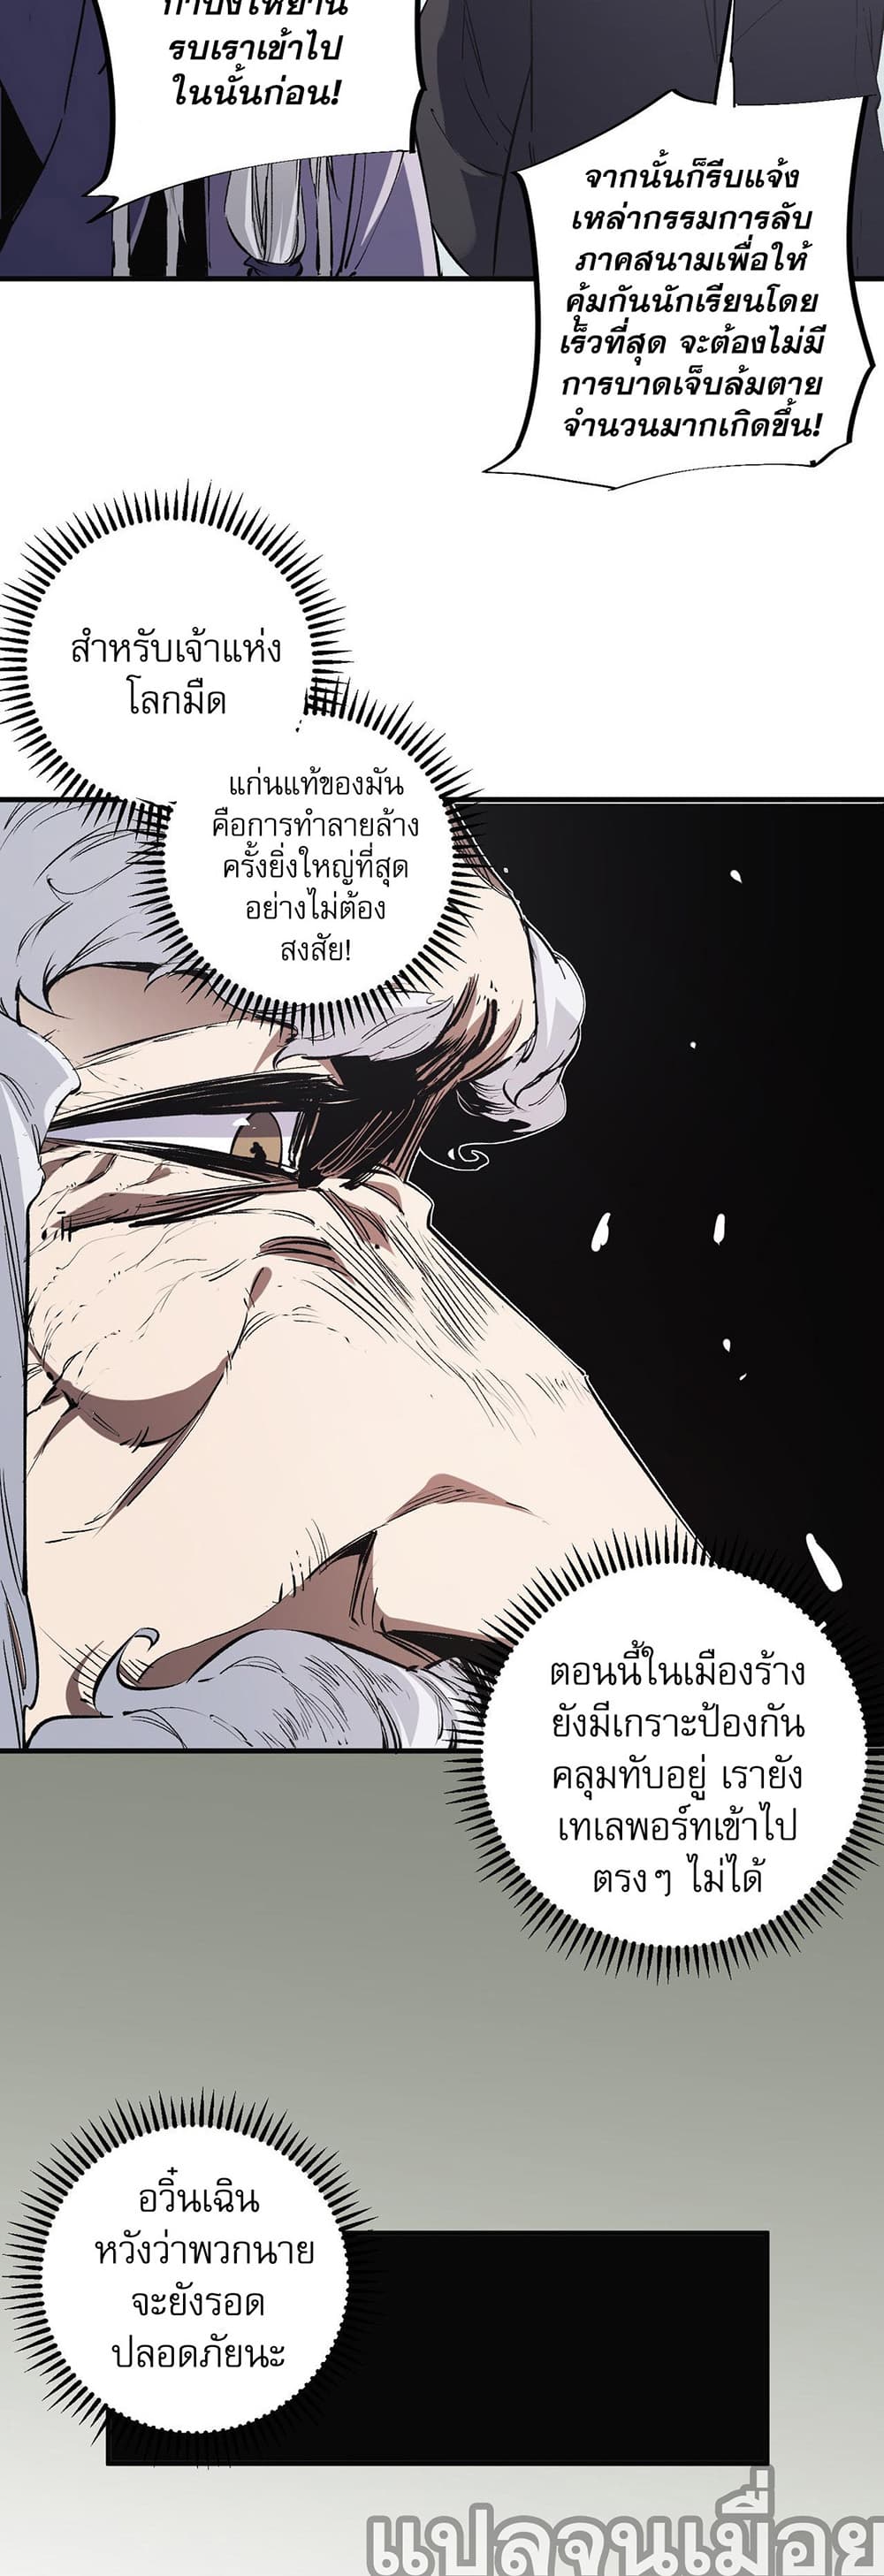 Job Changing for the Entire Population: The Jobless Me Will Terminate the Gods ฉันคือผู้เล่นไร้อาชีพที่สังหารเหล่าเทพ 41-41